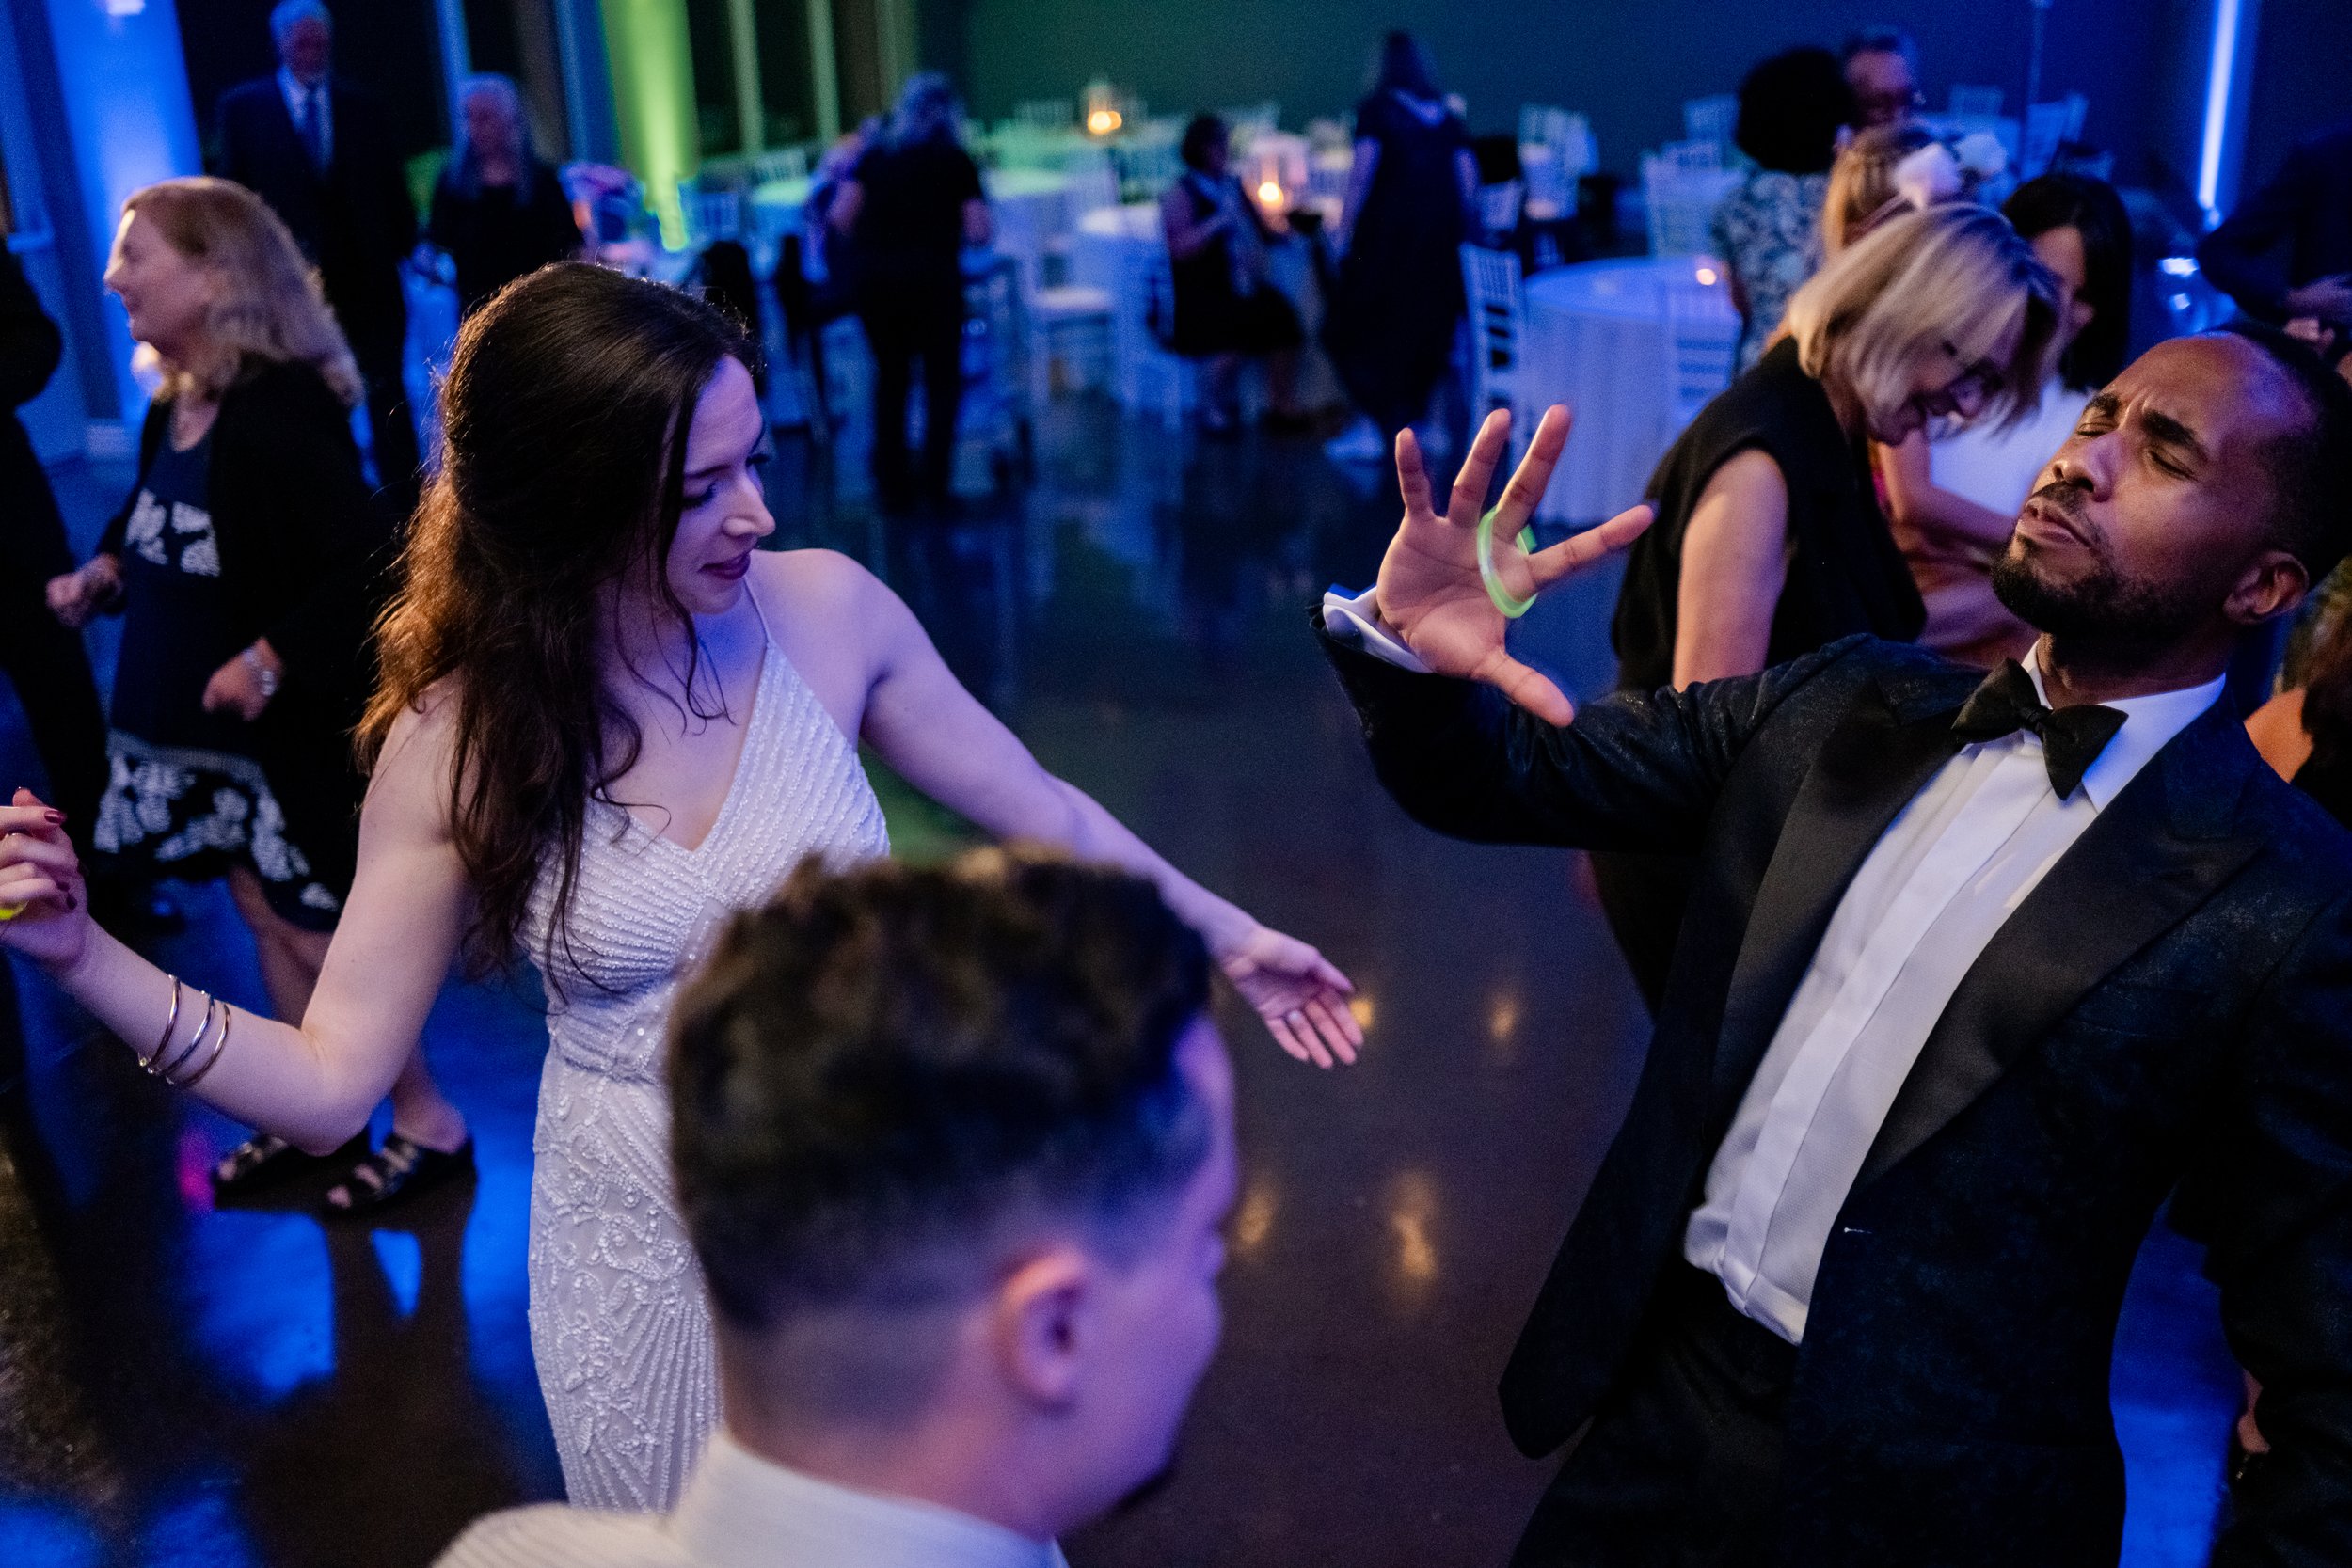 wedding guests dancing at a le belvedere wedding reception